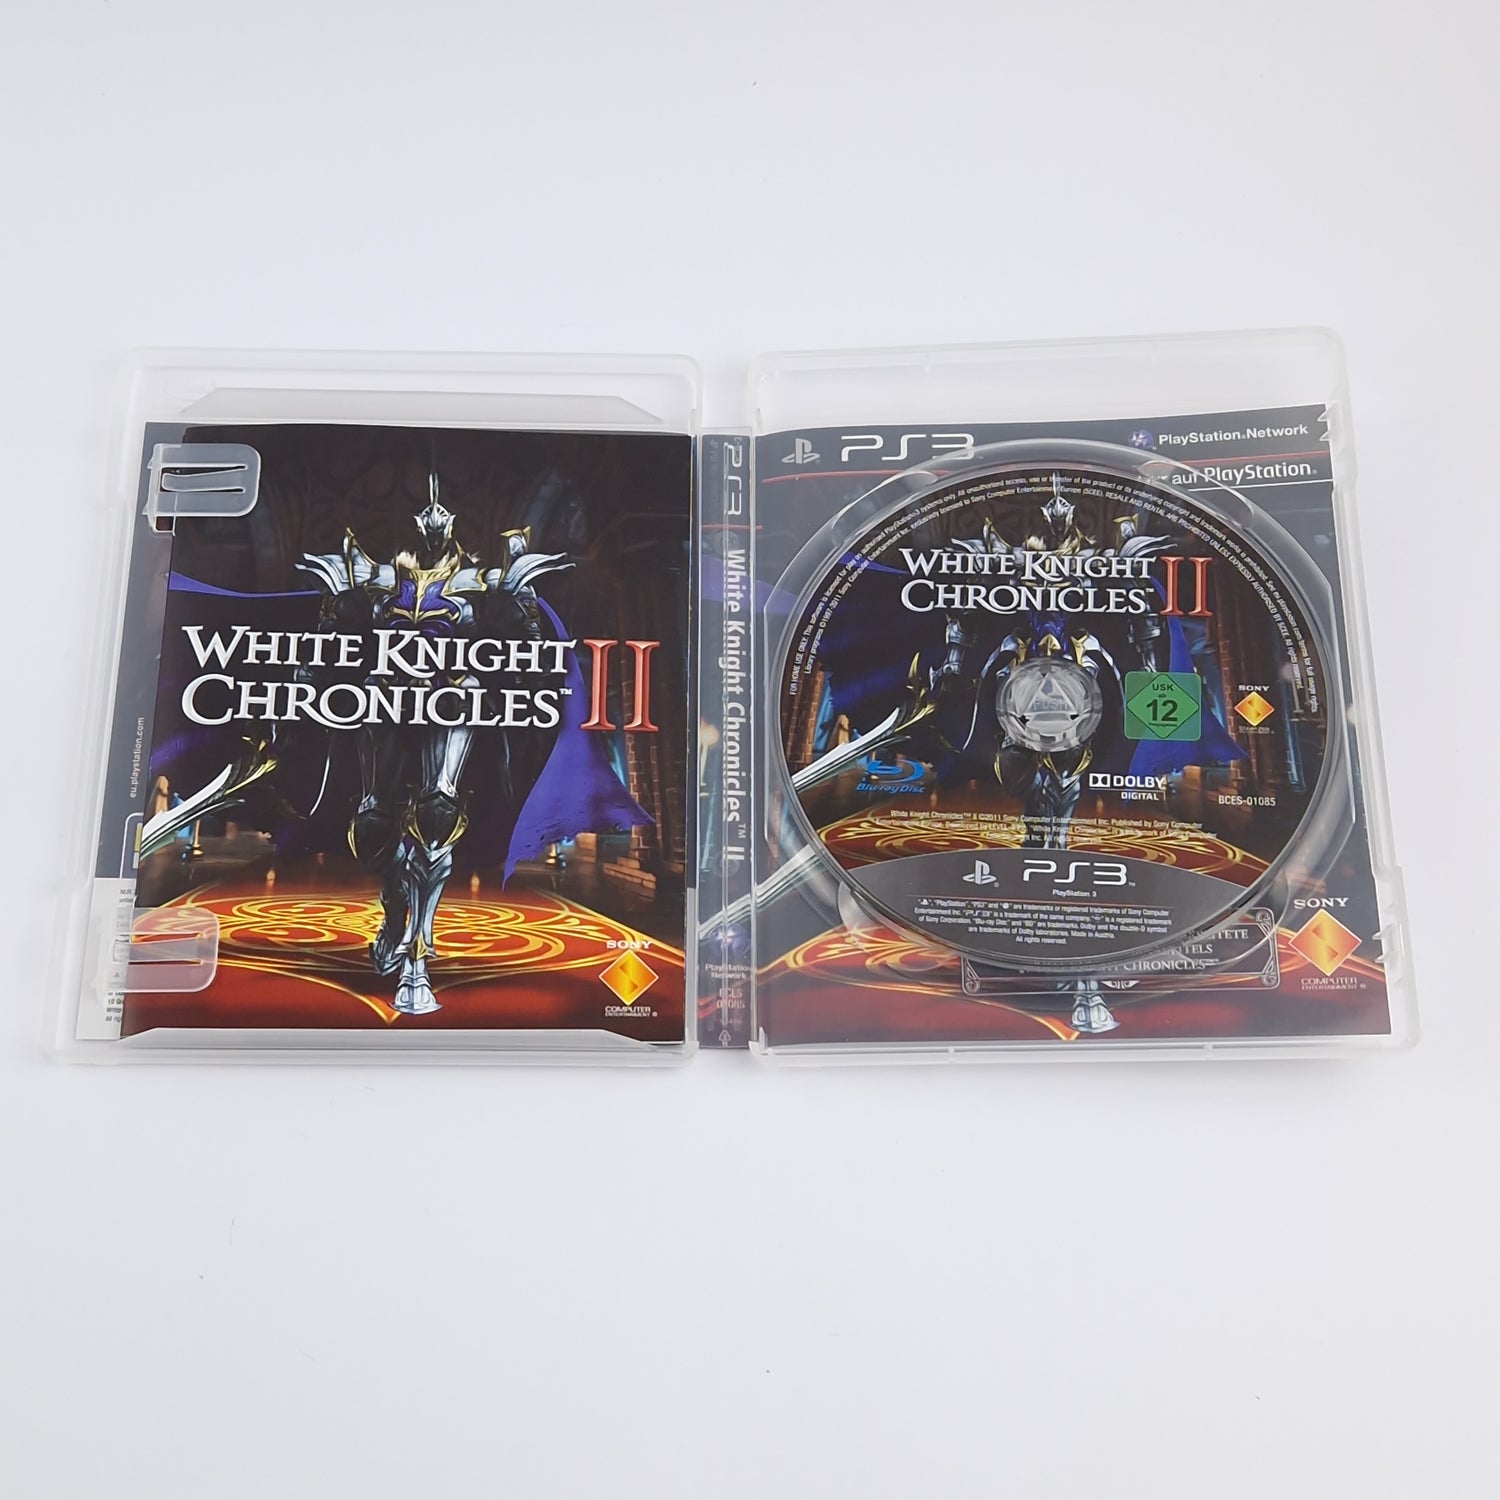 Sony Playstation 3 game: White Knight Chronicles II 2 - OVP manual PAL PS3